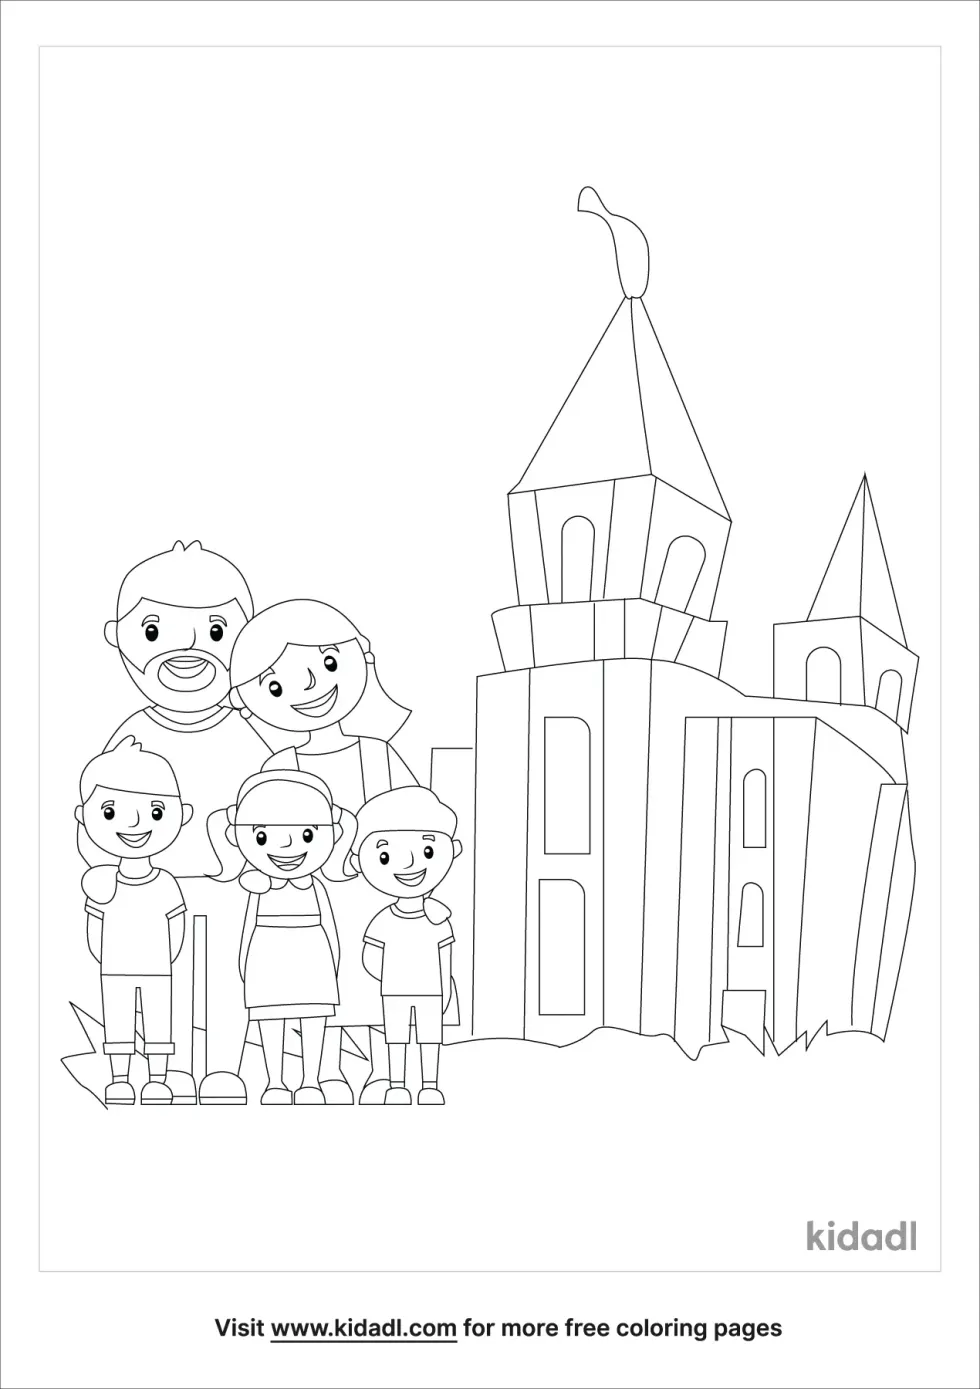 LDS Family Coloring Page